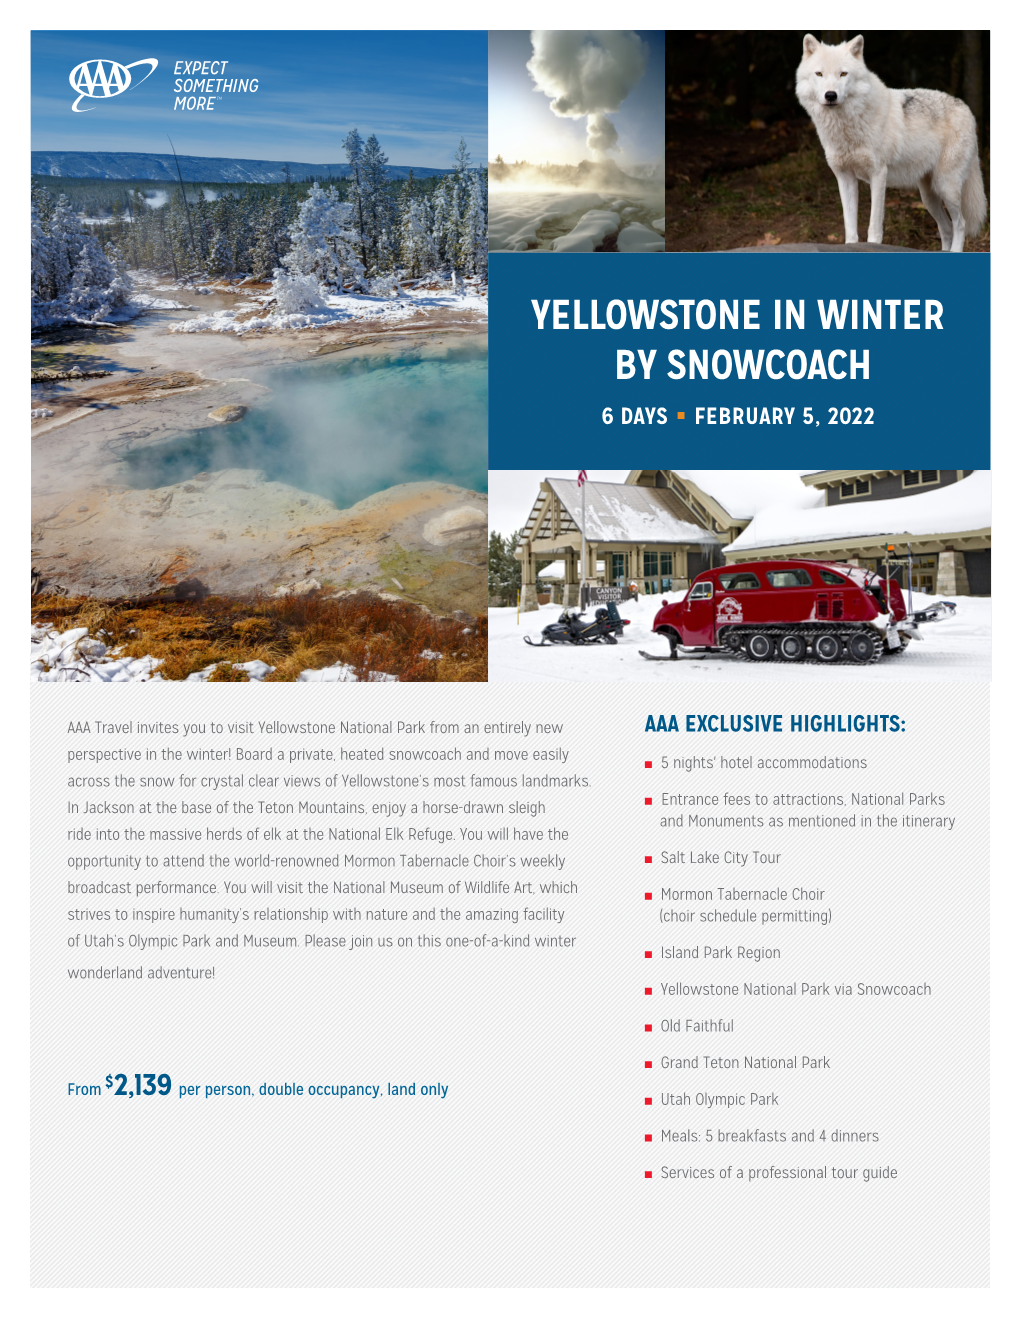 Yellowstone in Winter by Snowcoach 6 Days ■ February 5, 2022